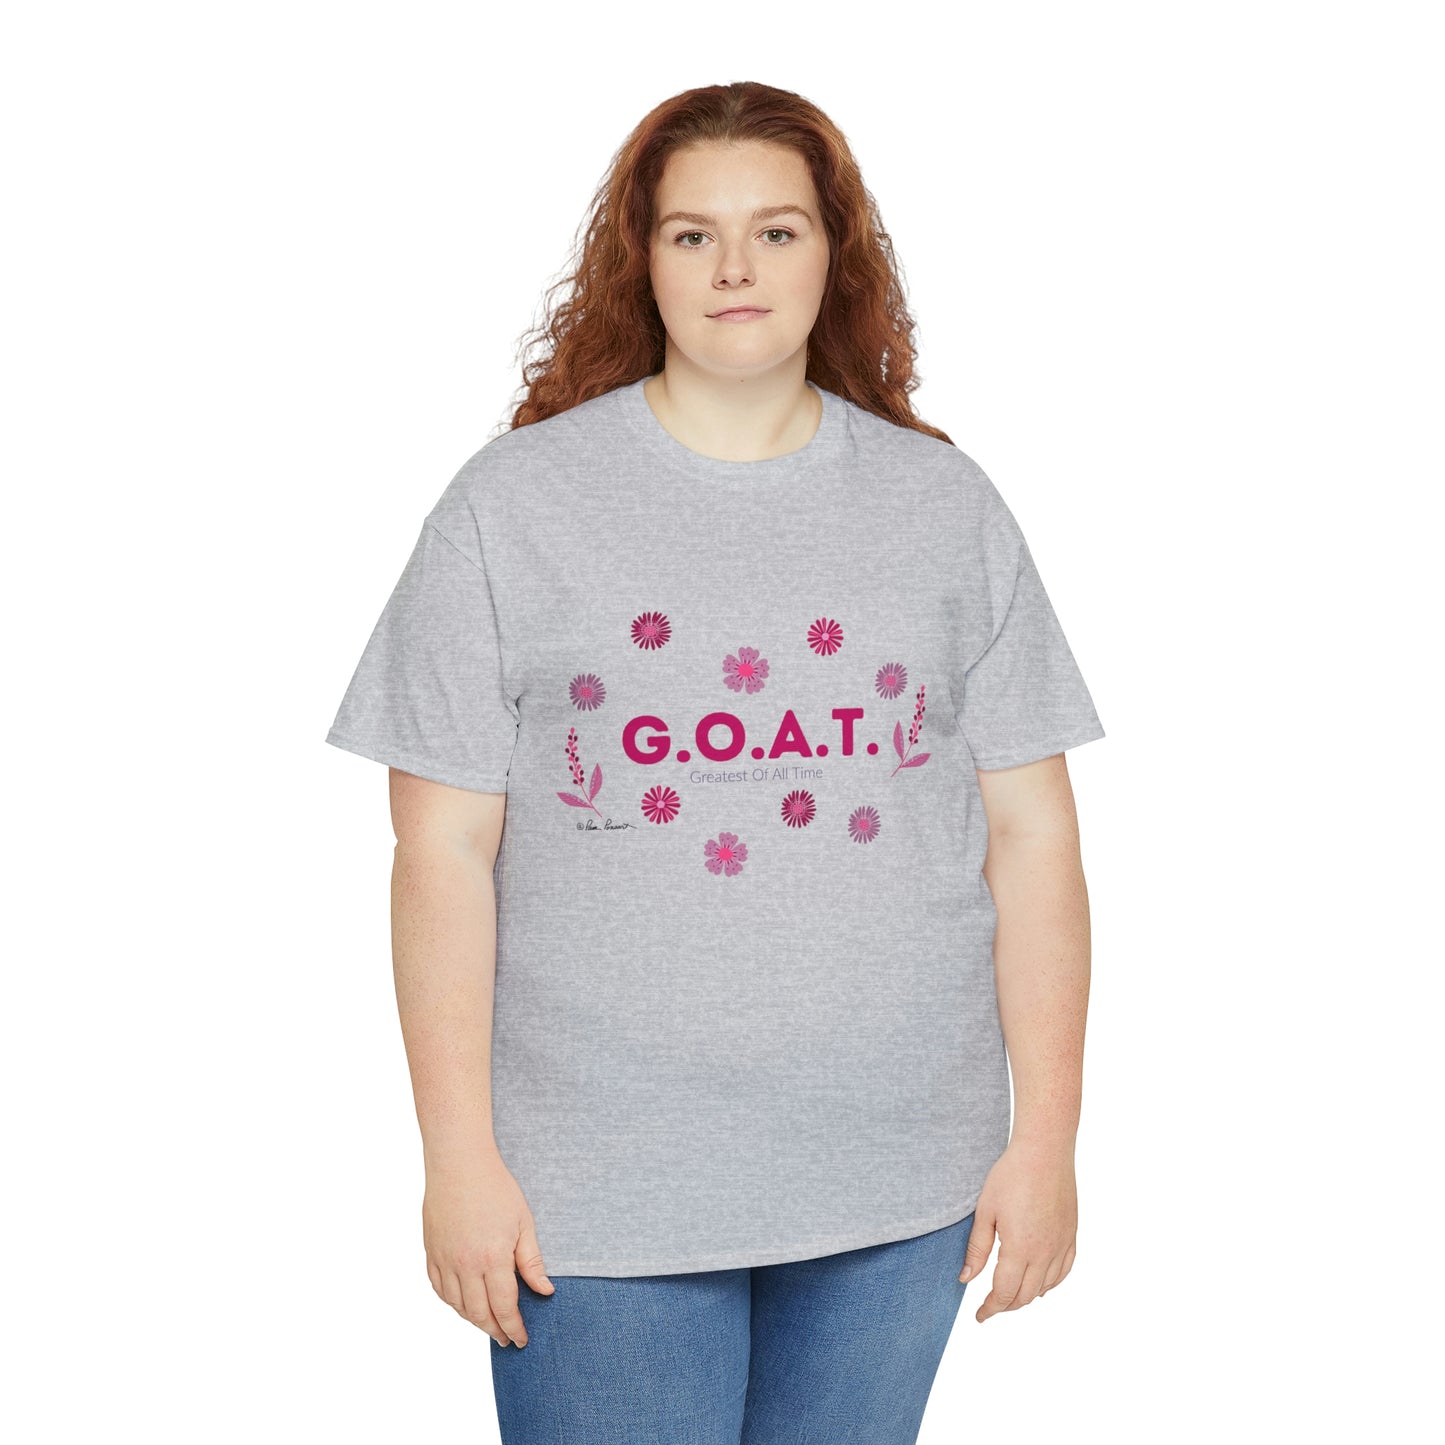 Mock up of a plus-size woman wearing the grey t-shirt